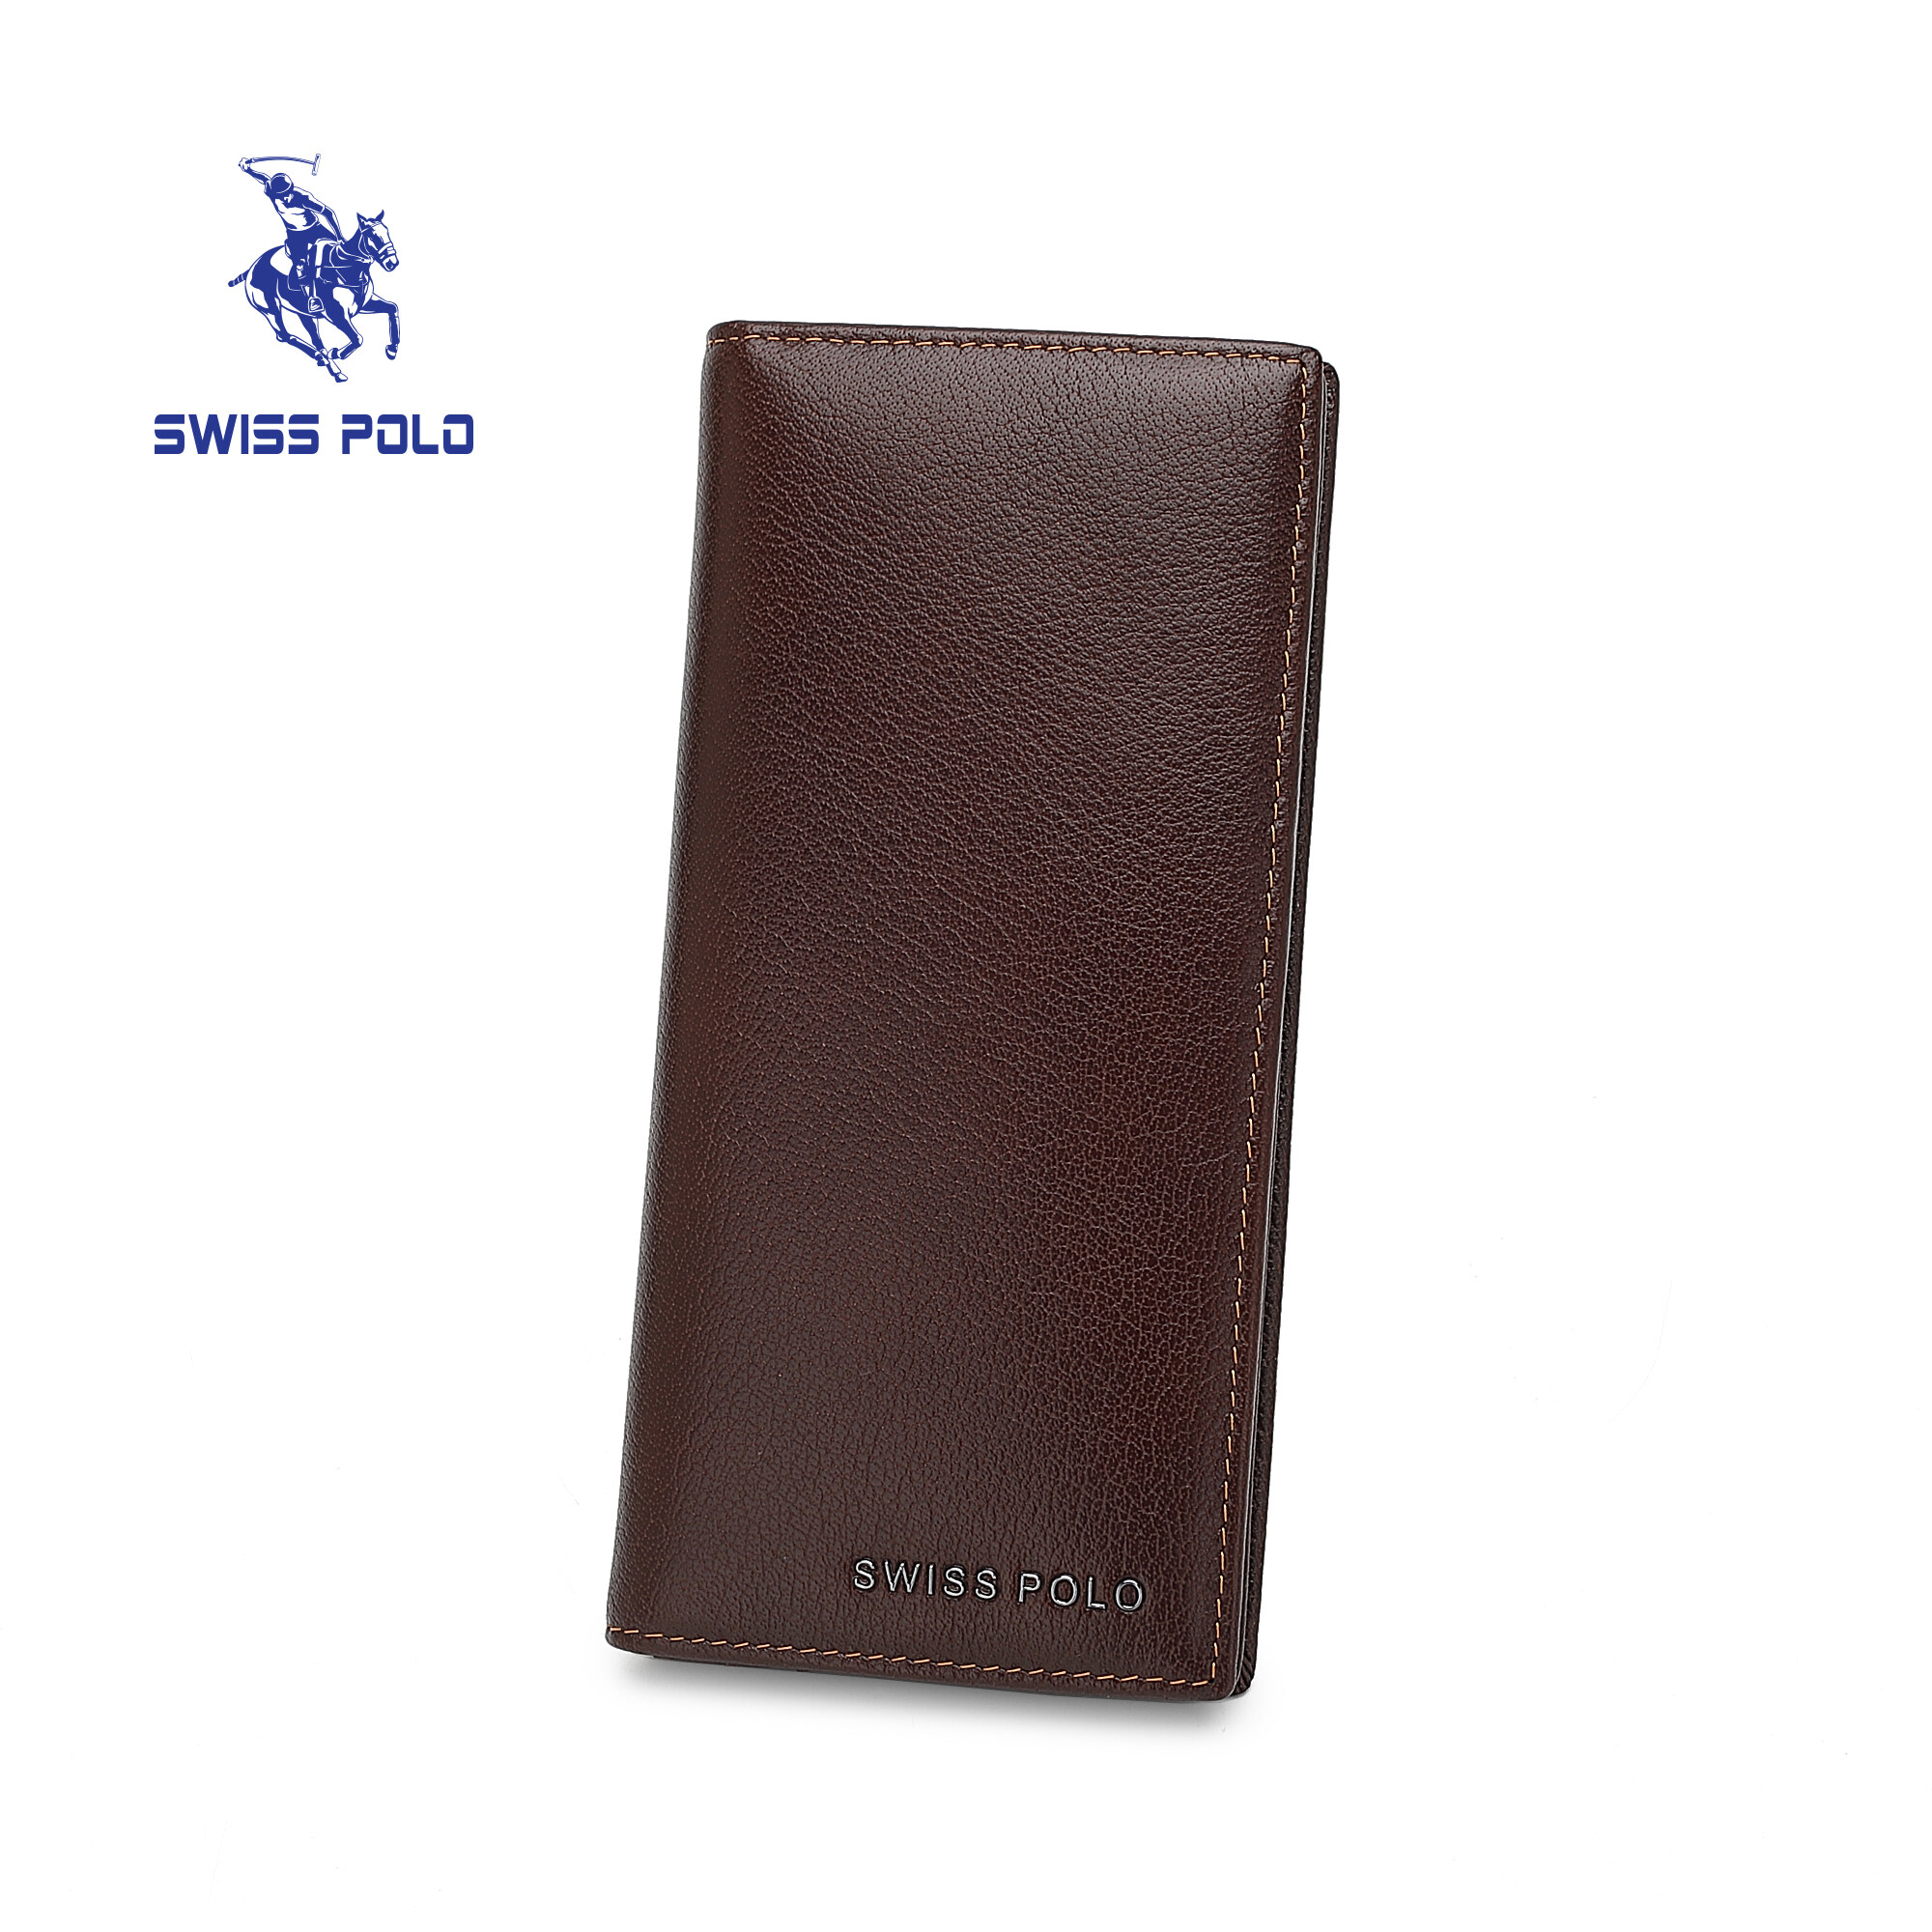 SWISS POLO Genuine Leather Long Wallet SW 194-1 BROWN